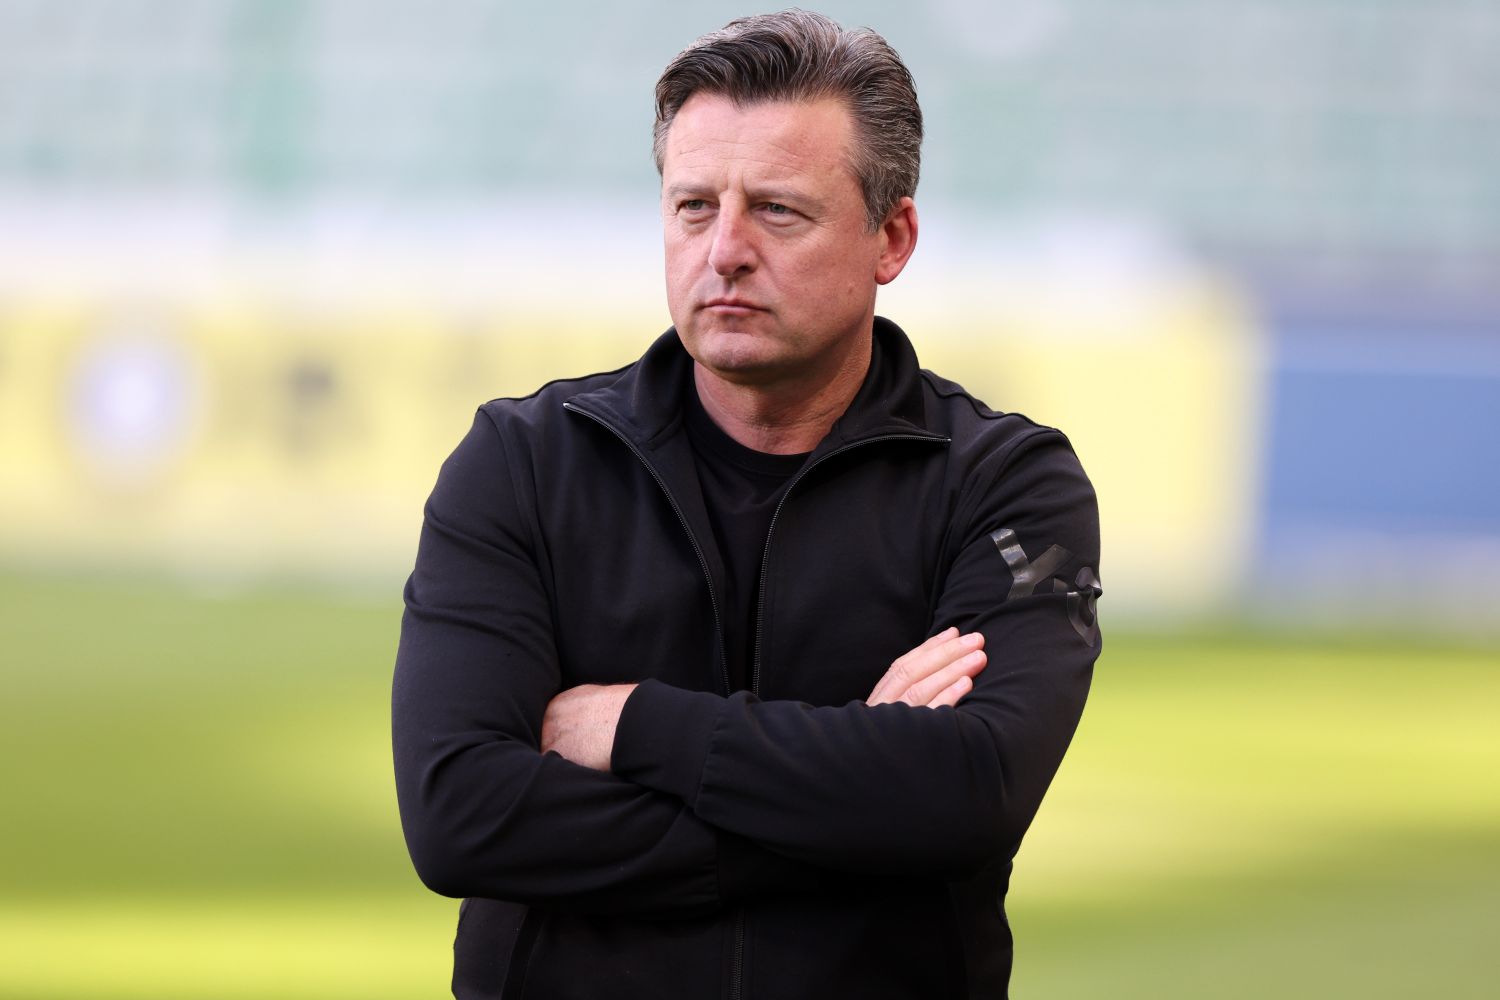 “His second big mistake in a row.”  Legia Warsaw fans want changes